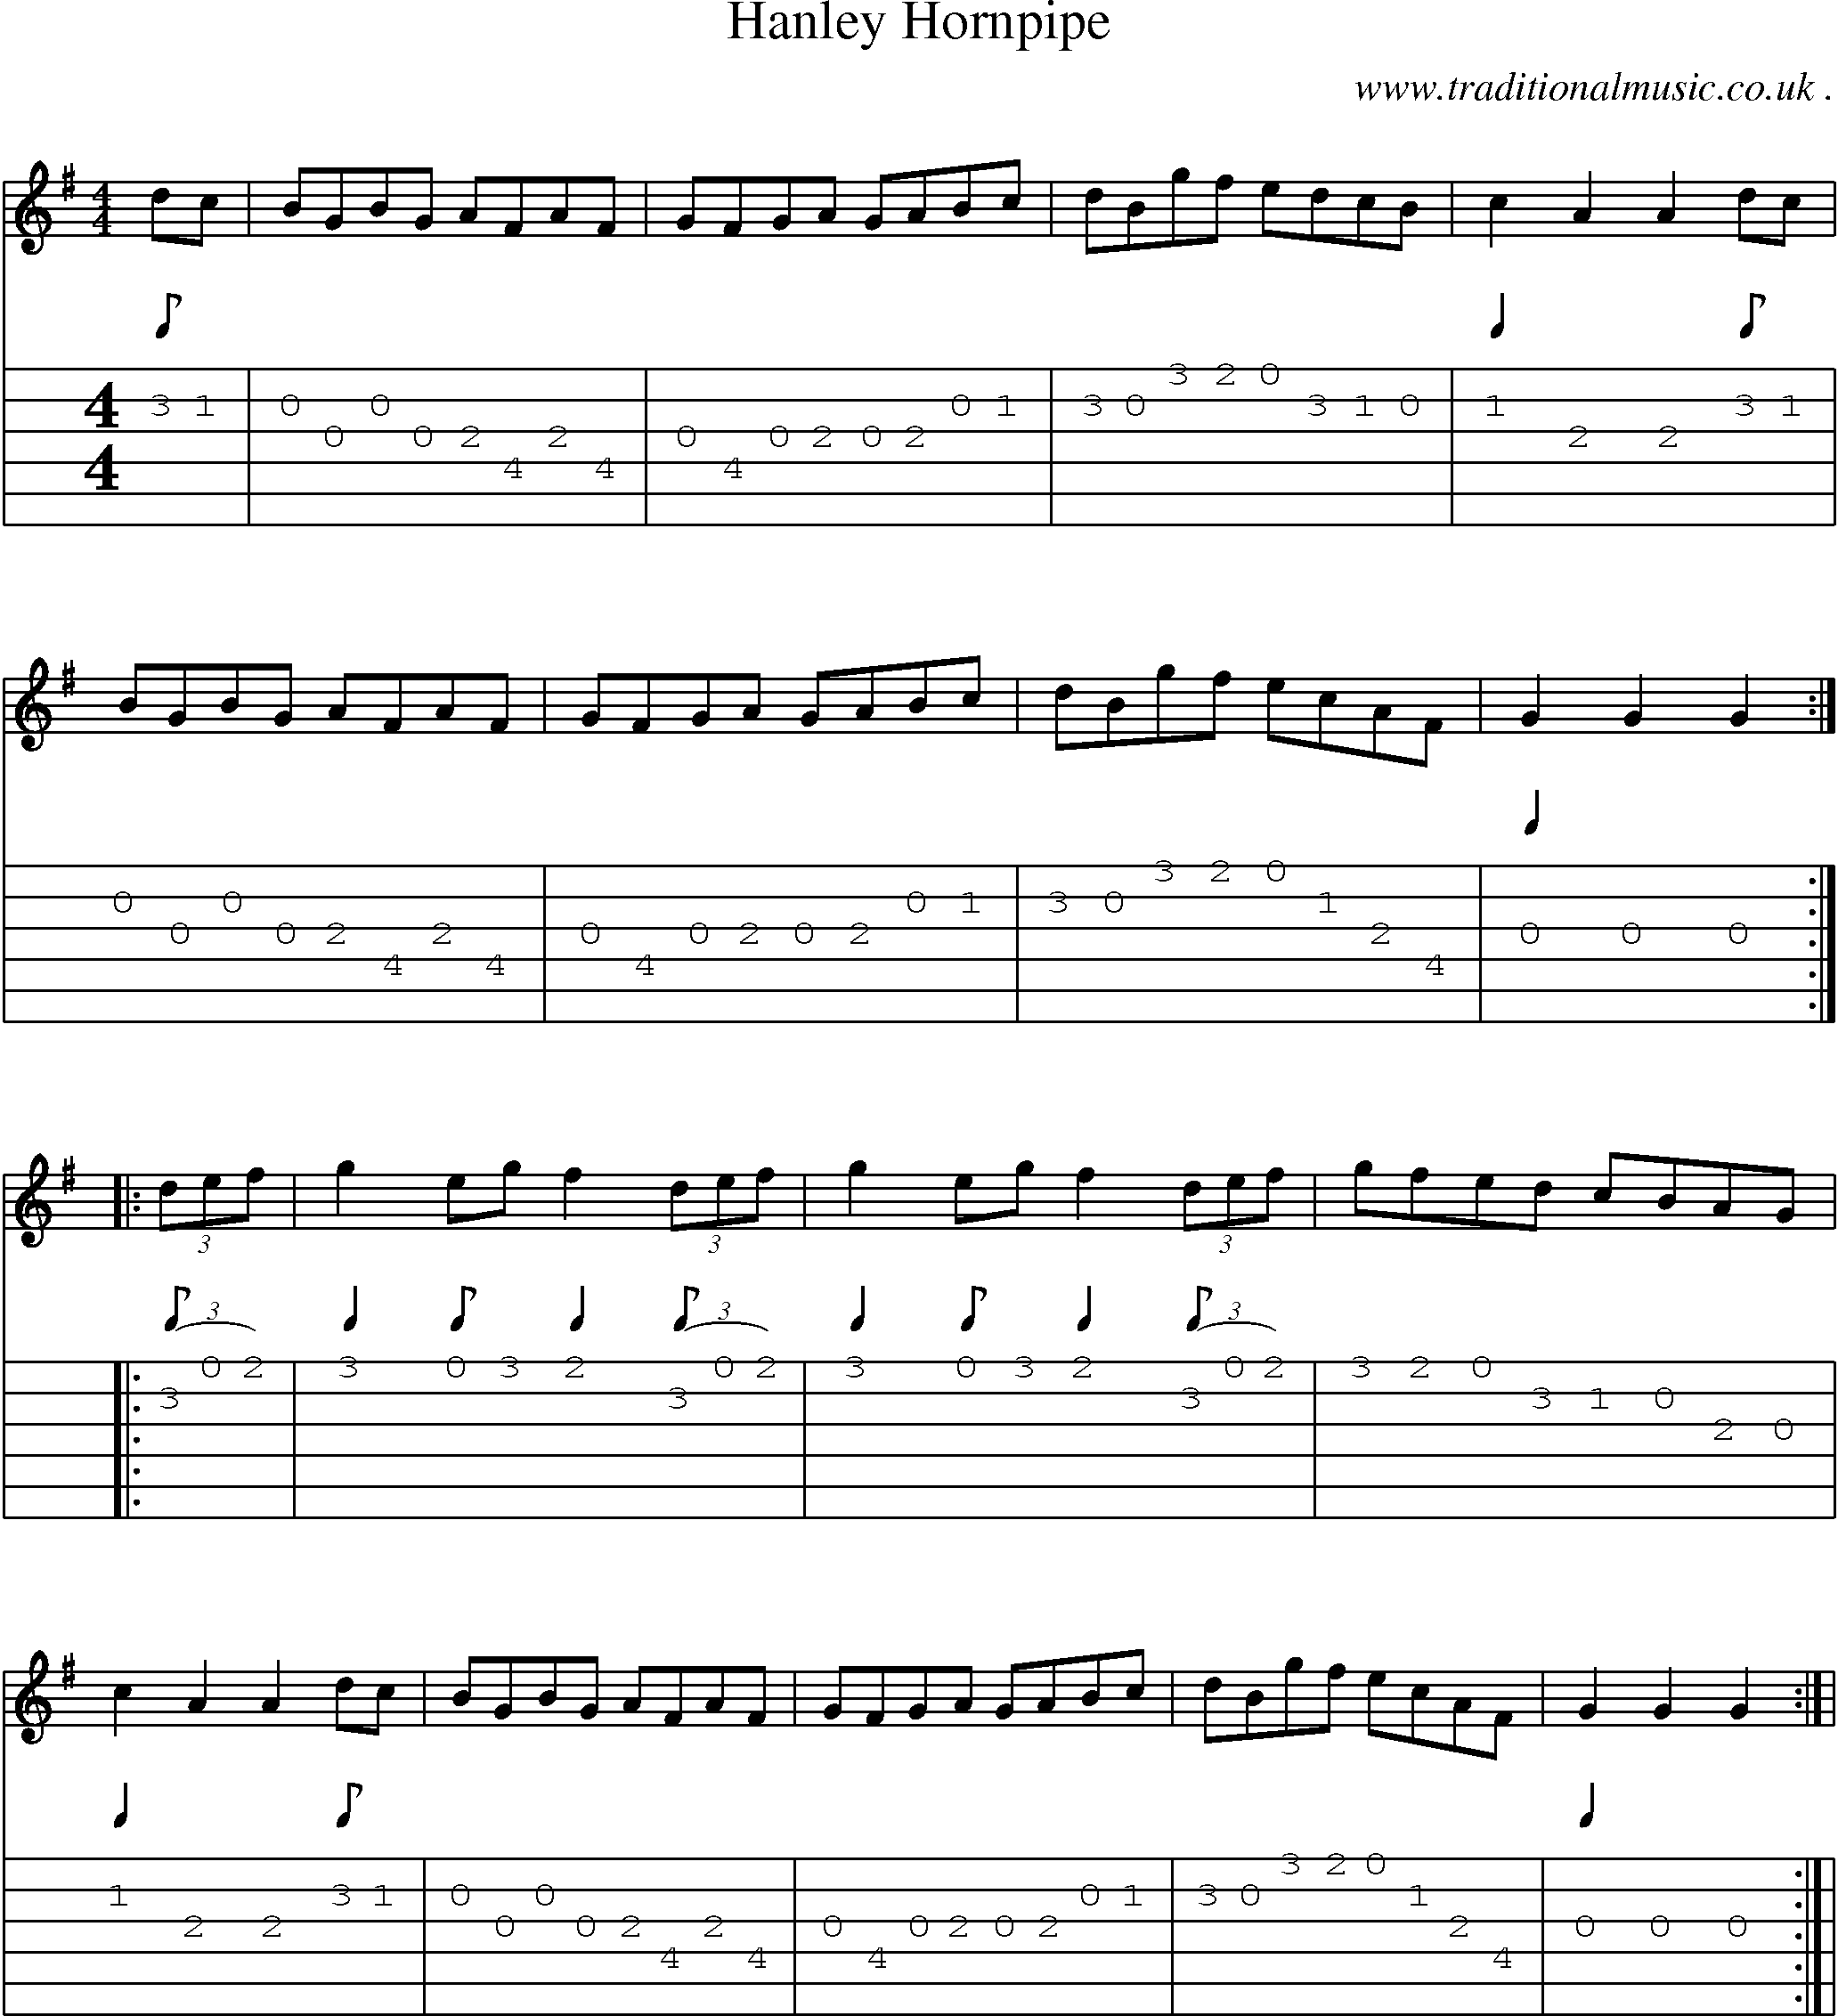 Sheet-Music and Guitar Tabs for Hanley Hornpipe